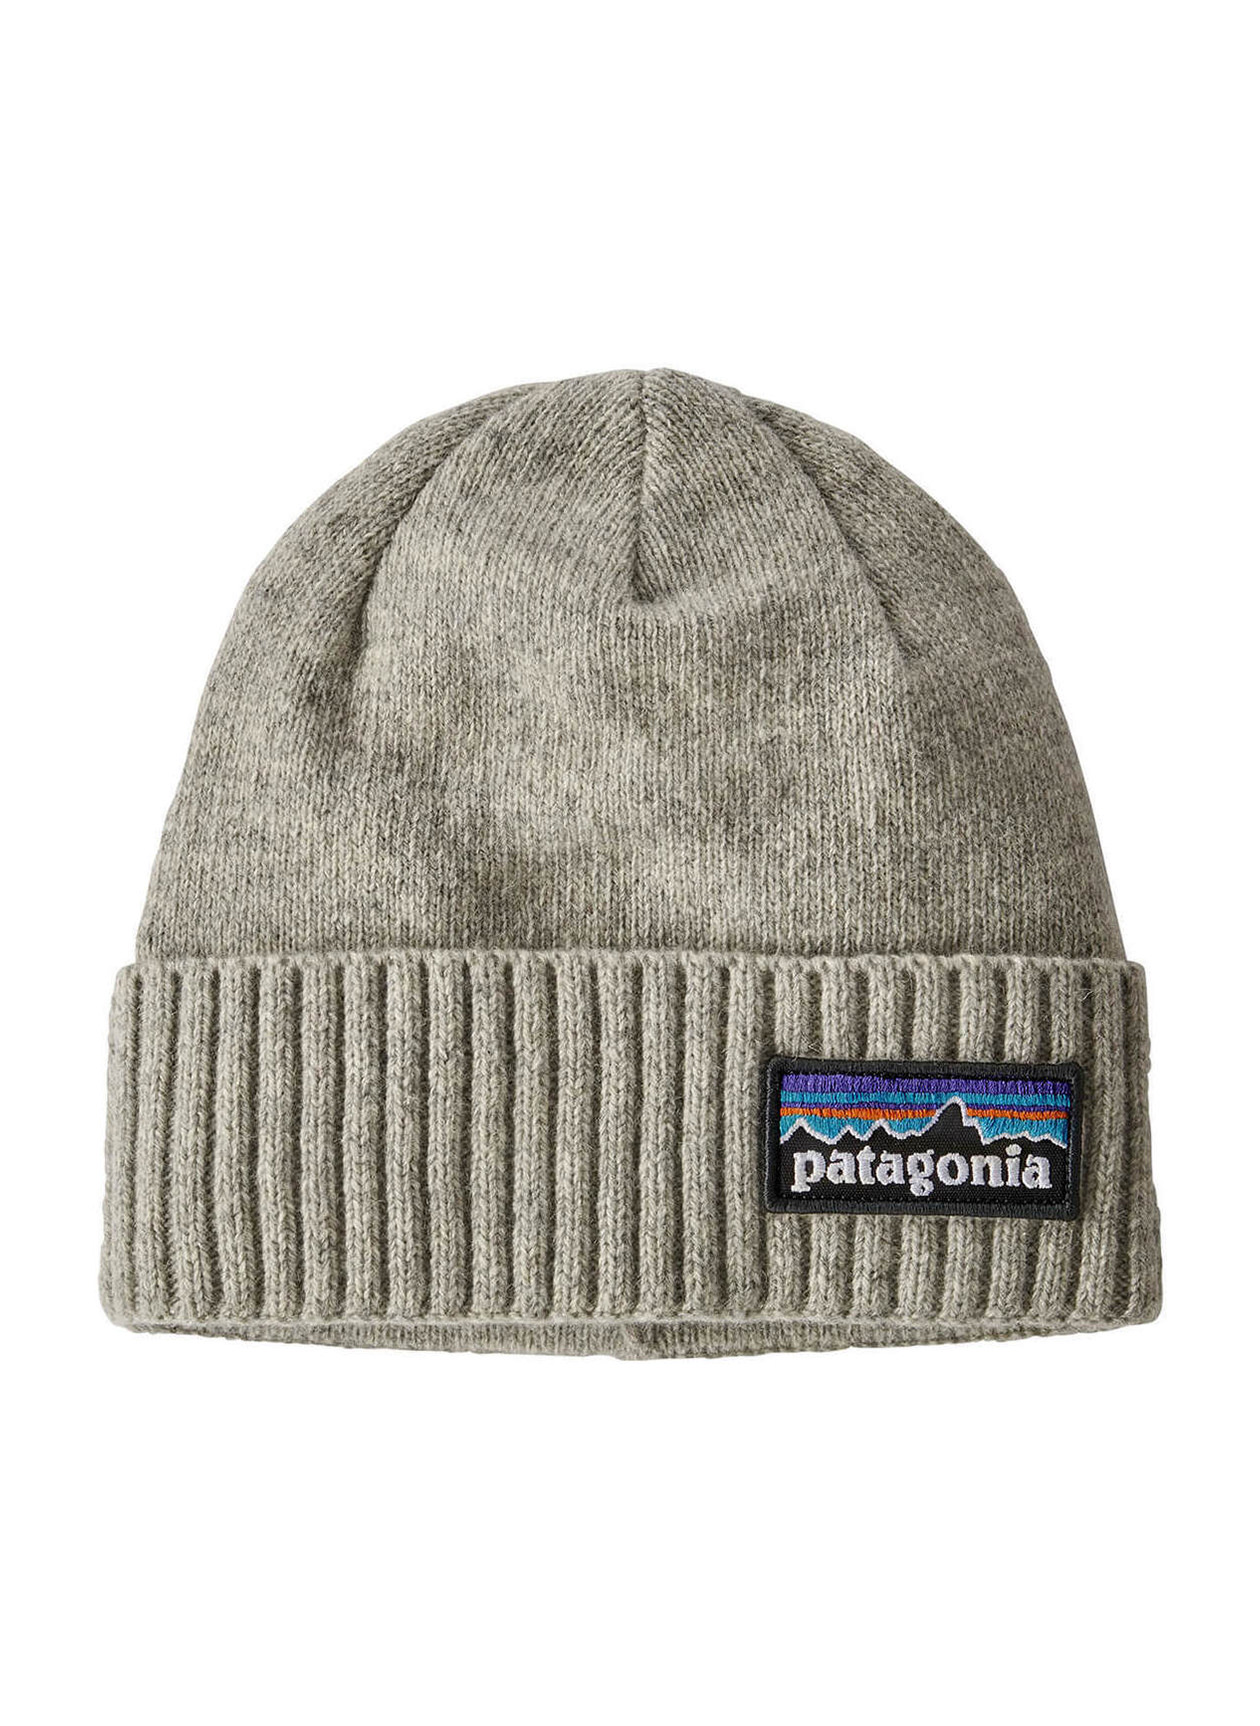 Patagonia Drifter Grey Brodeo Beanie